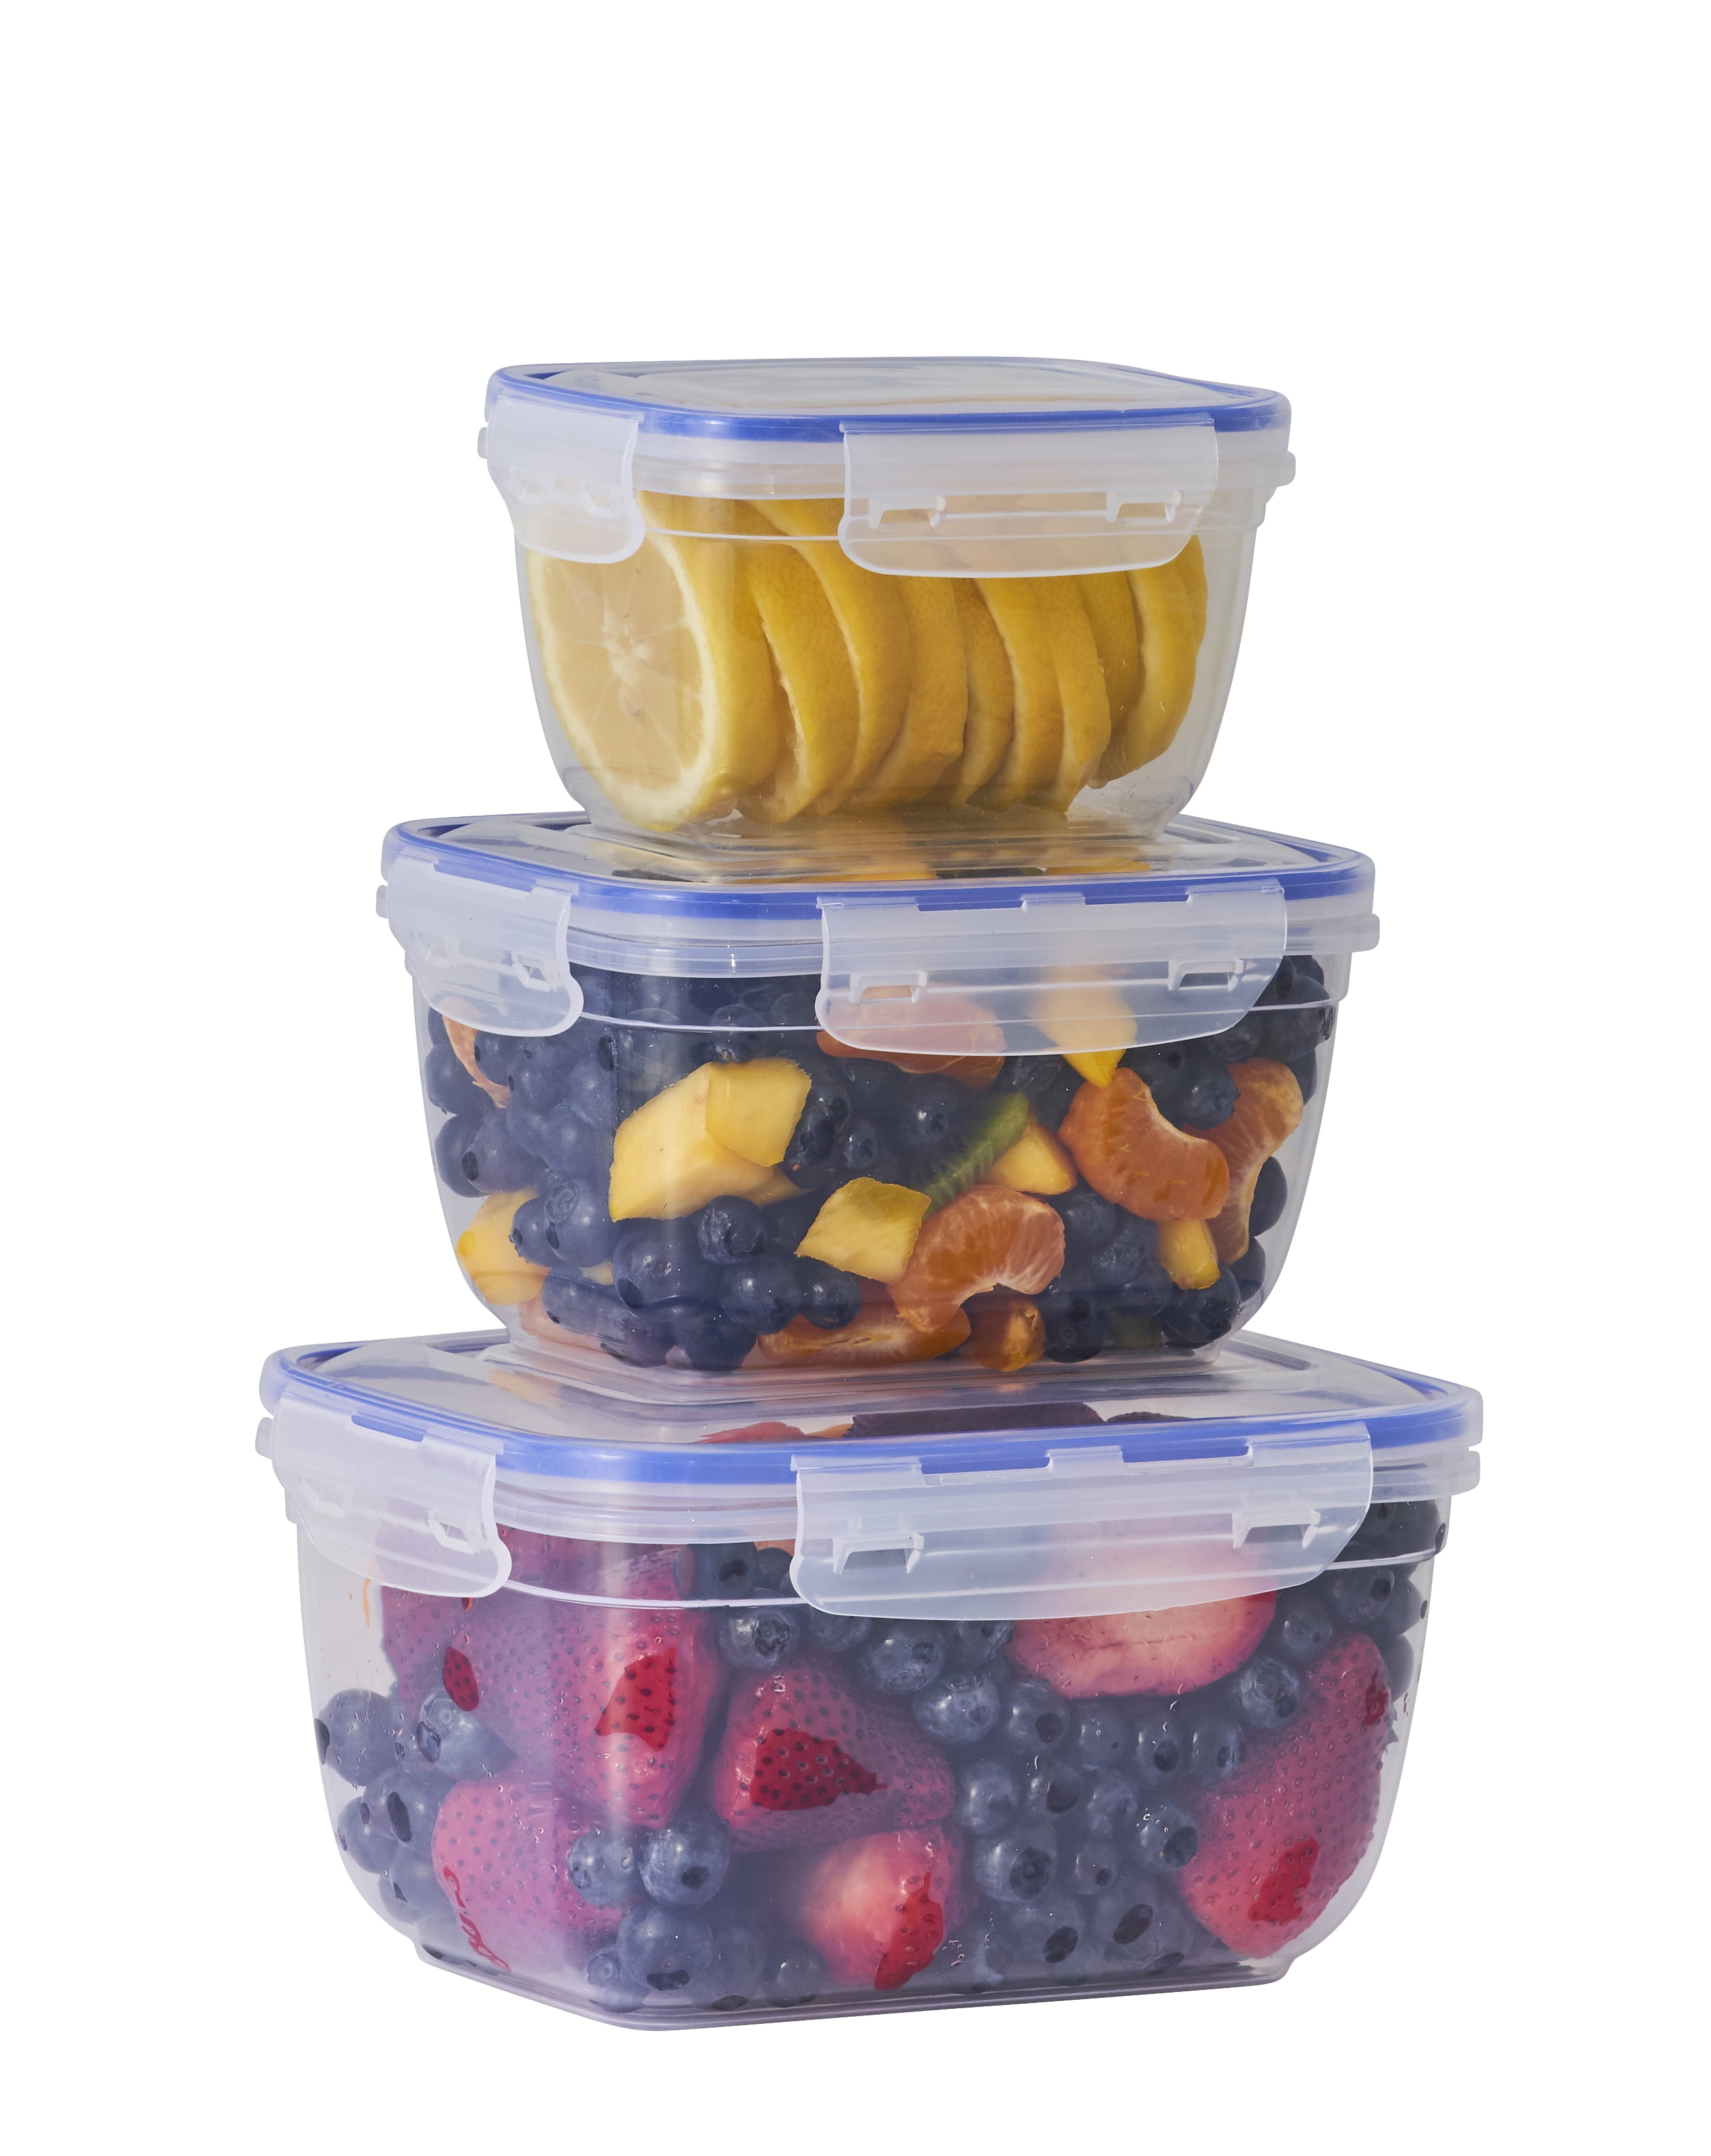  Shazo 32PCS Food Storage Containers with Airtight Lids Plastic  Leak Proof BPA Free Containers Bento Box